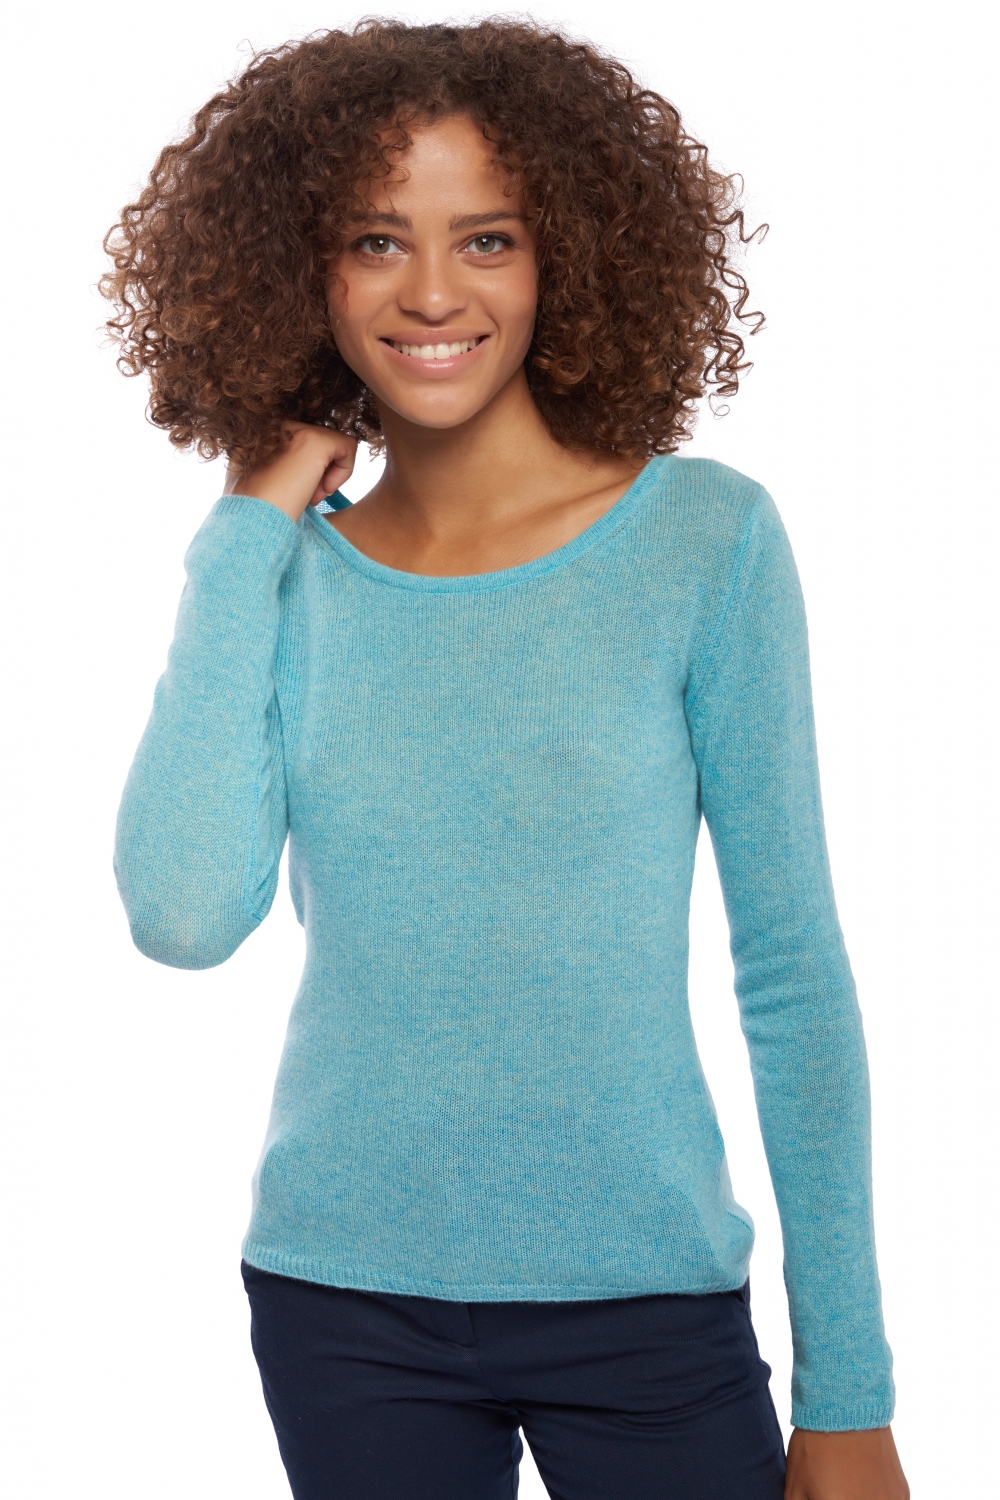 Cashmere ladies basic sweaters at low prices caleen piscine xl